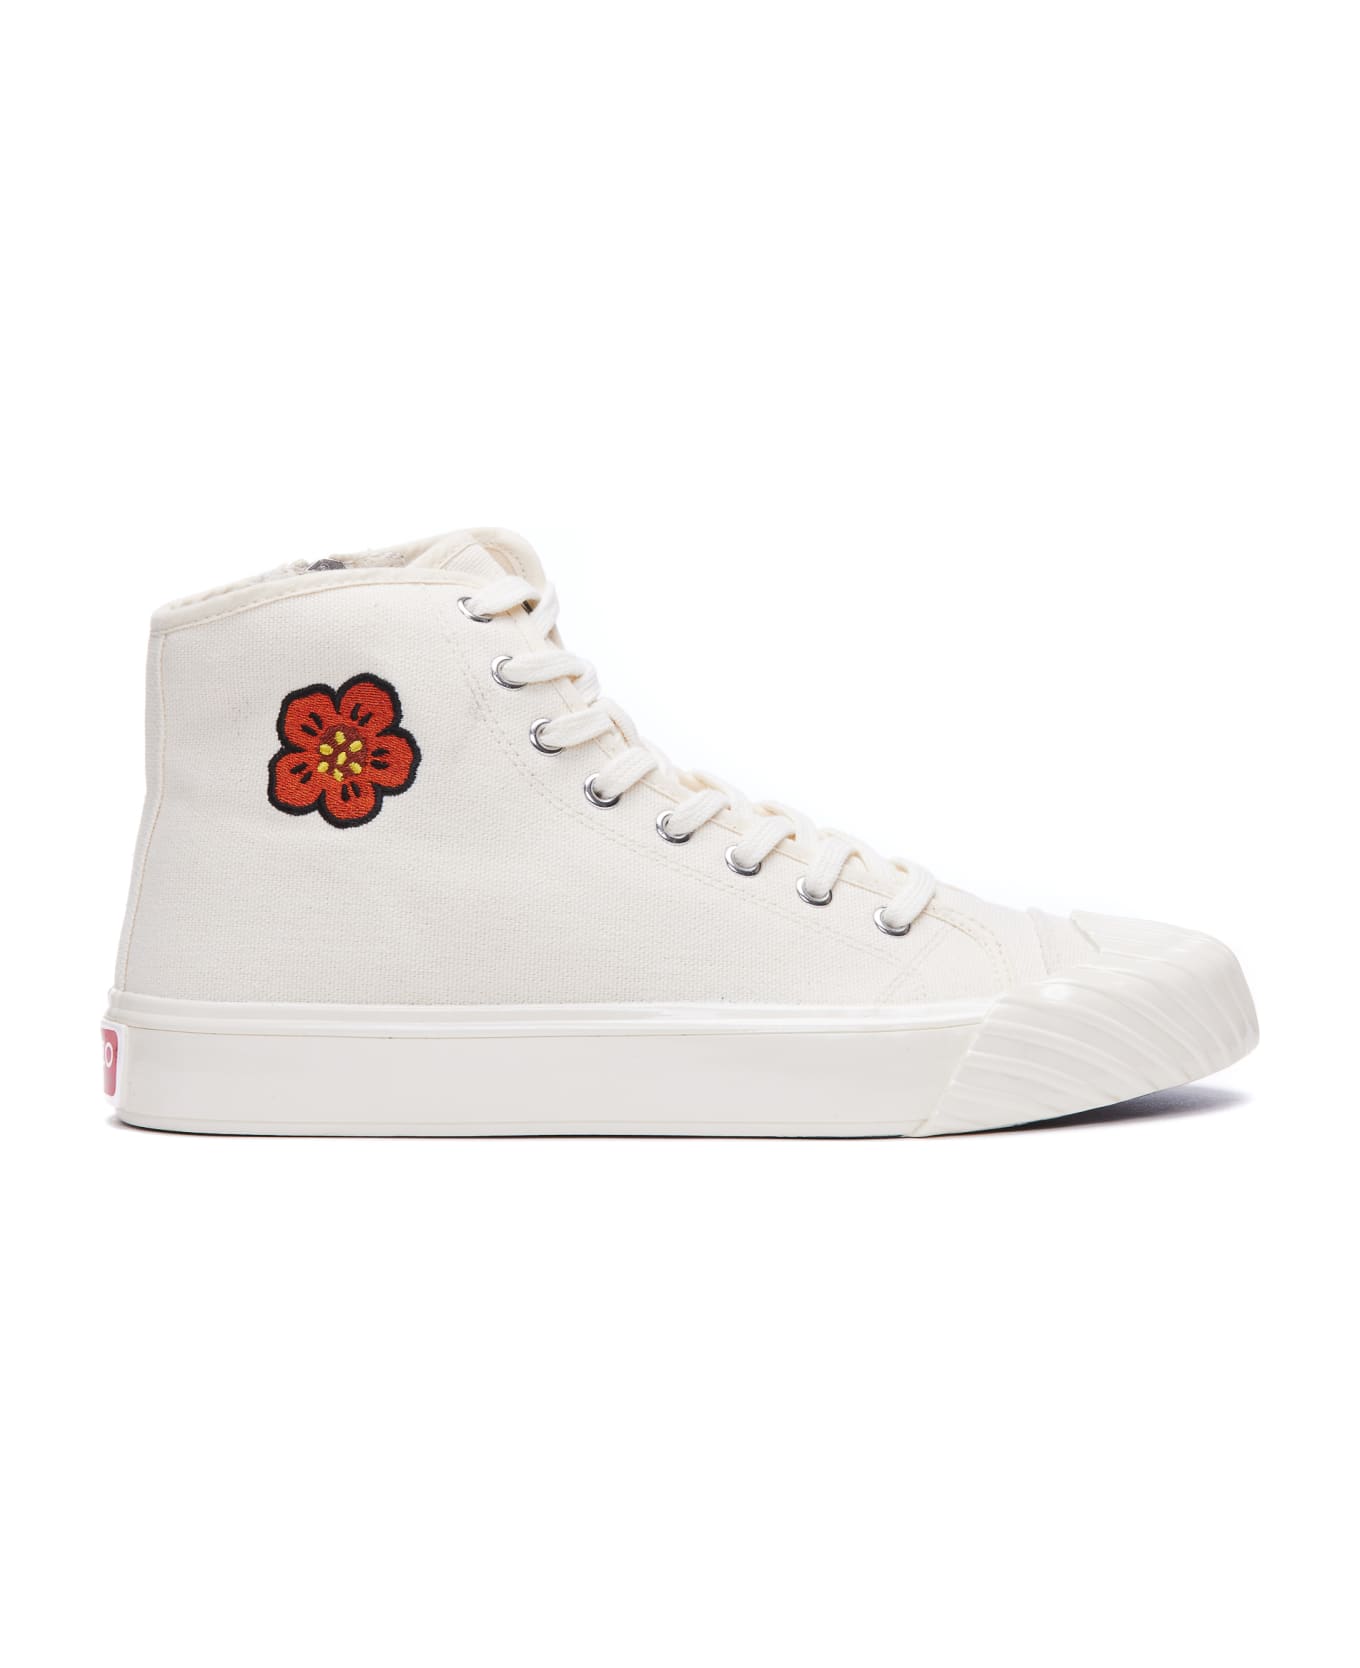 Kenzo school High Top Trainers Sneakers - White スニーカー